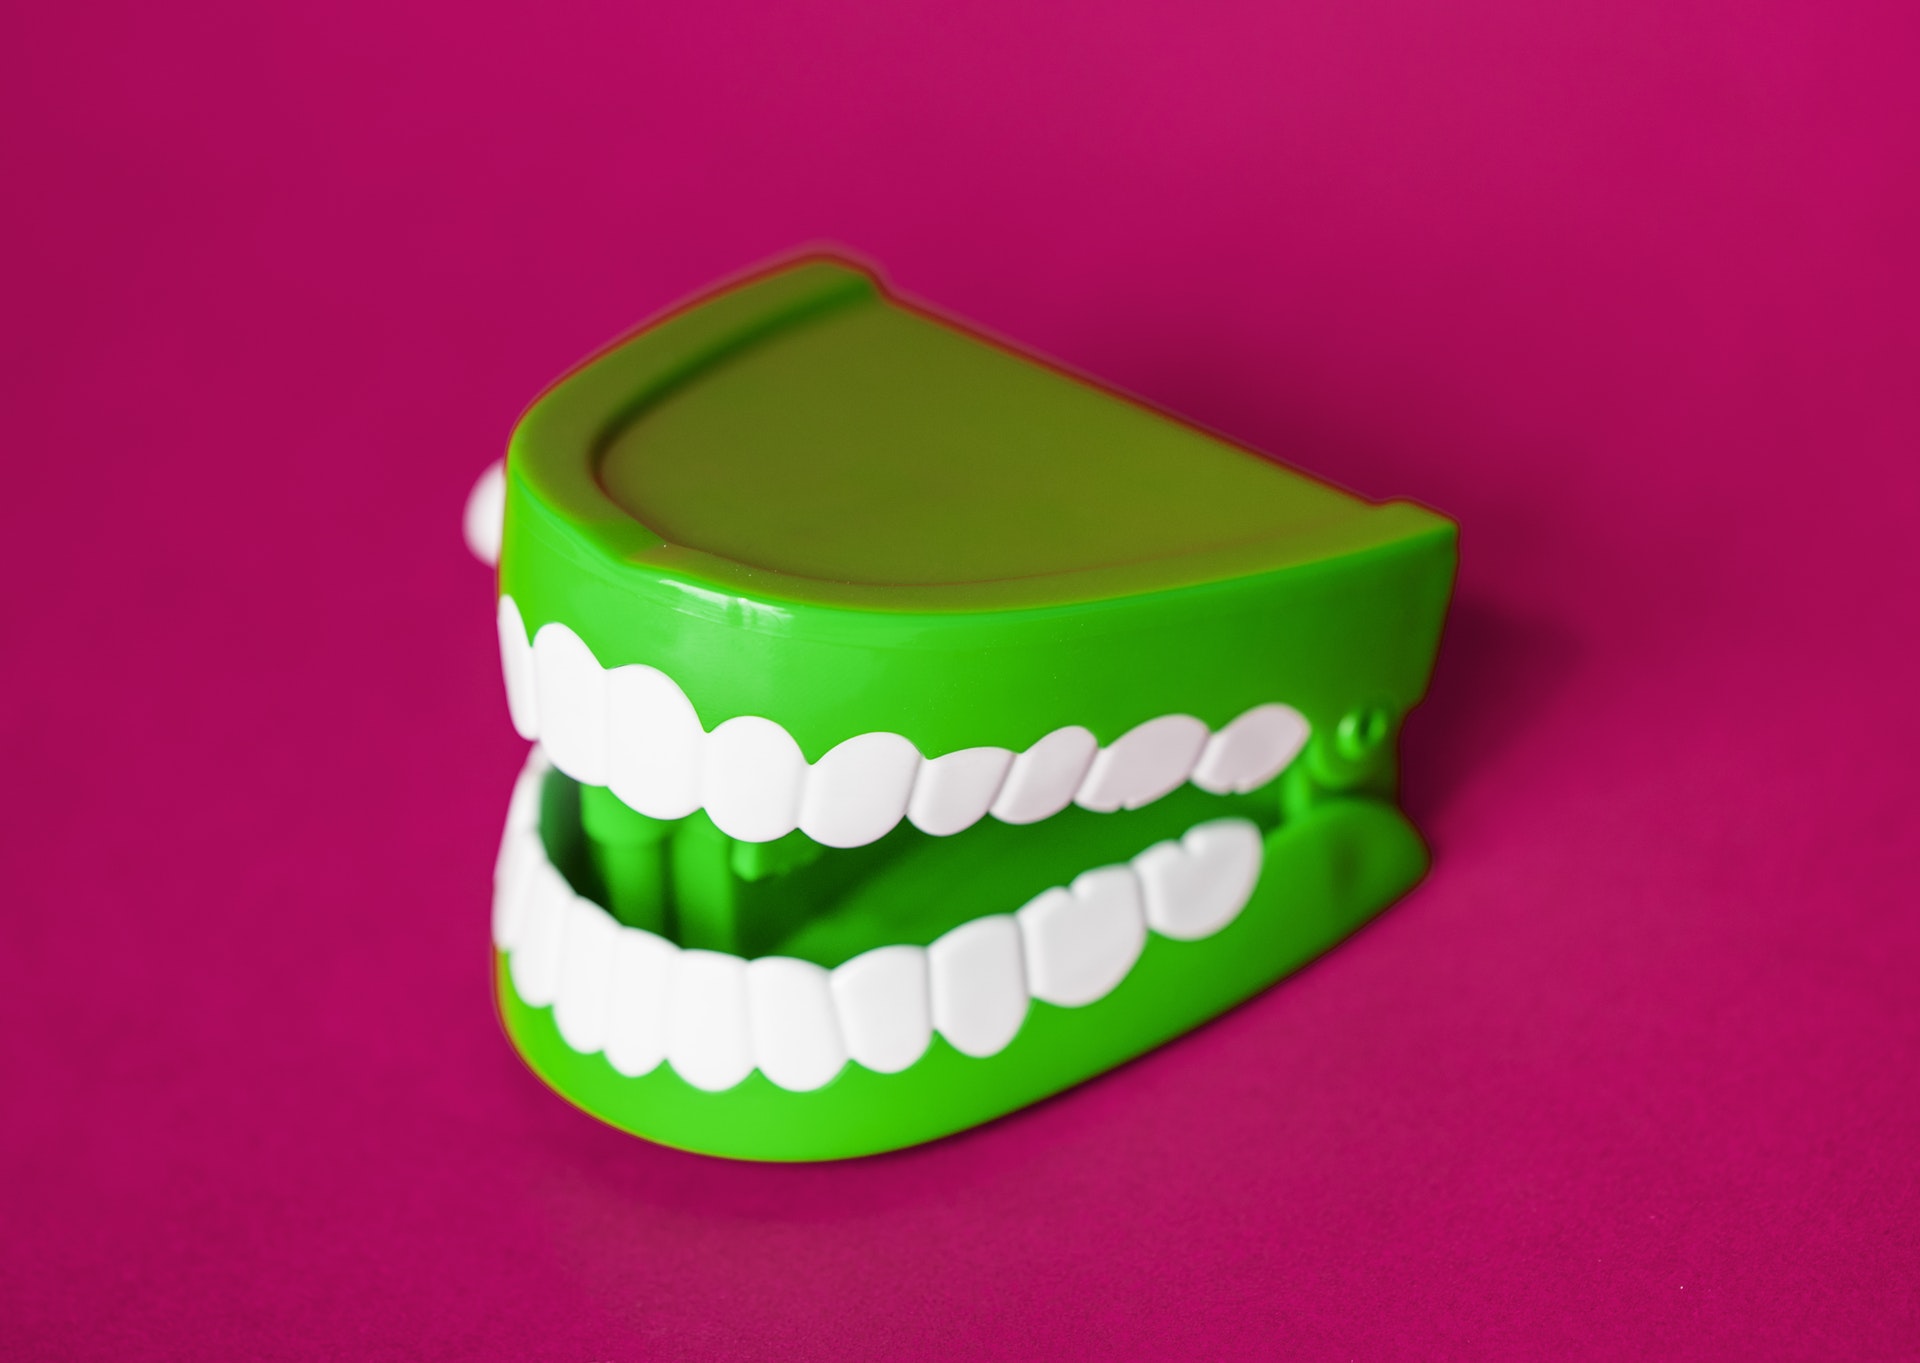 Green comedy chattering teeth